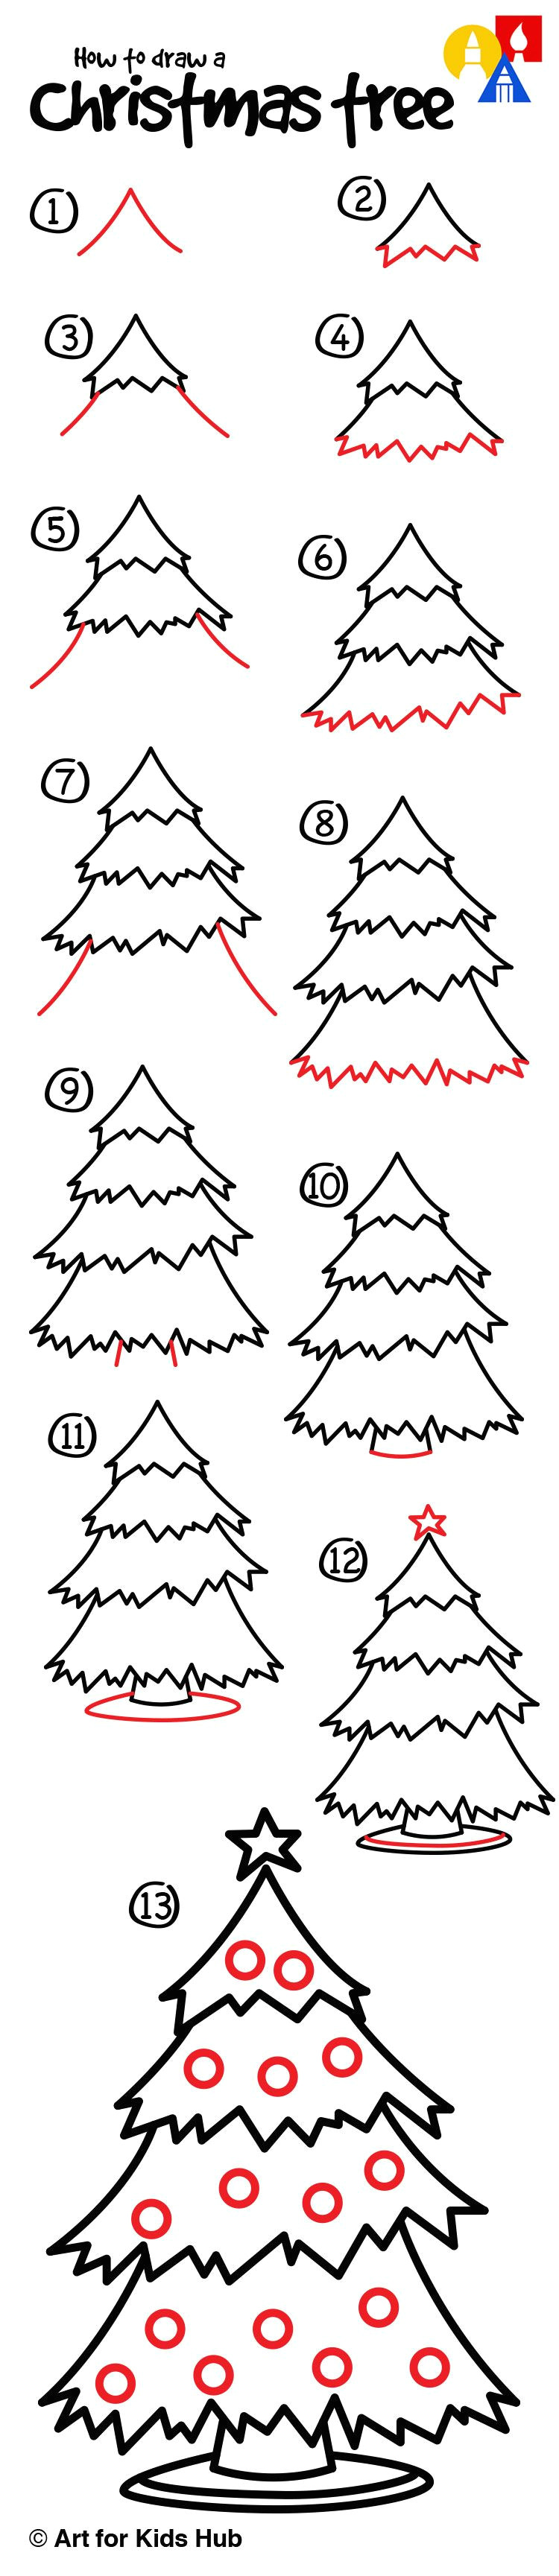 Easy Drawings Christmas Tree How to Draw A Christmas Tree Art for Kids Hub Christmas Winter